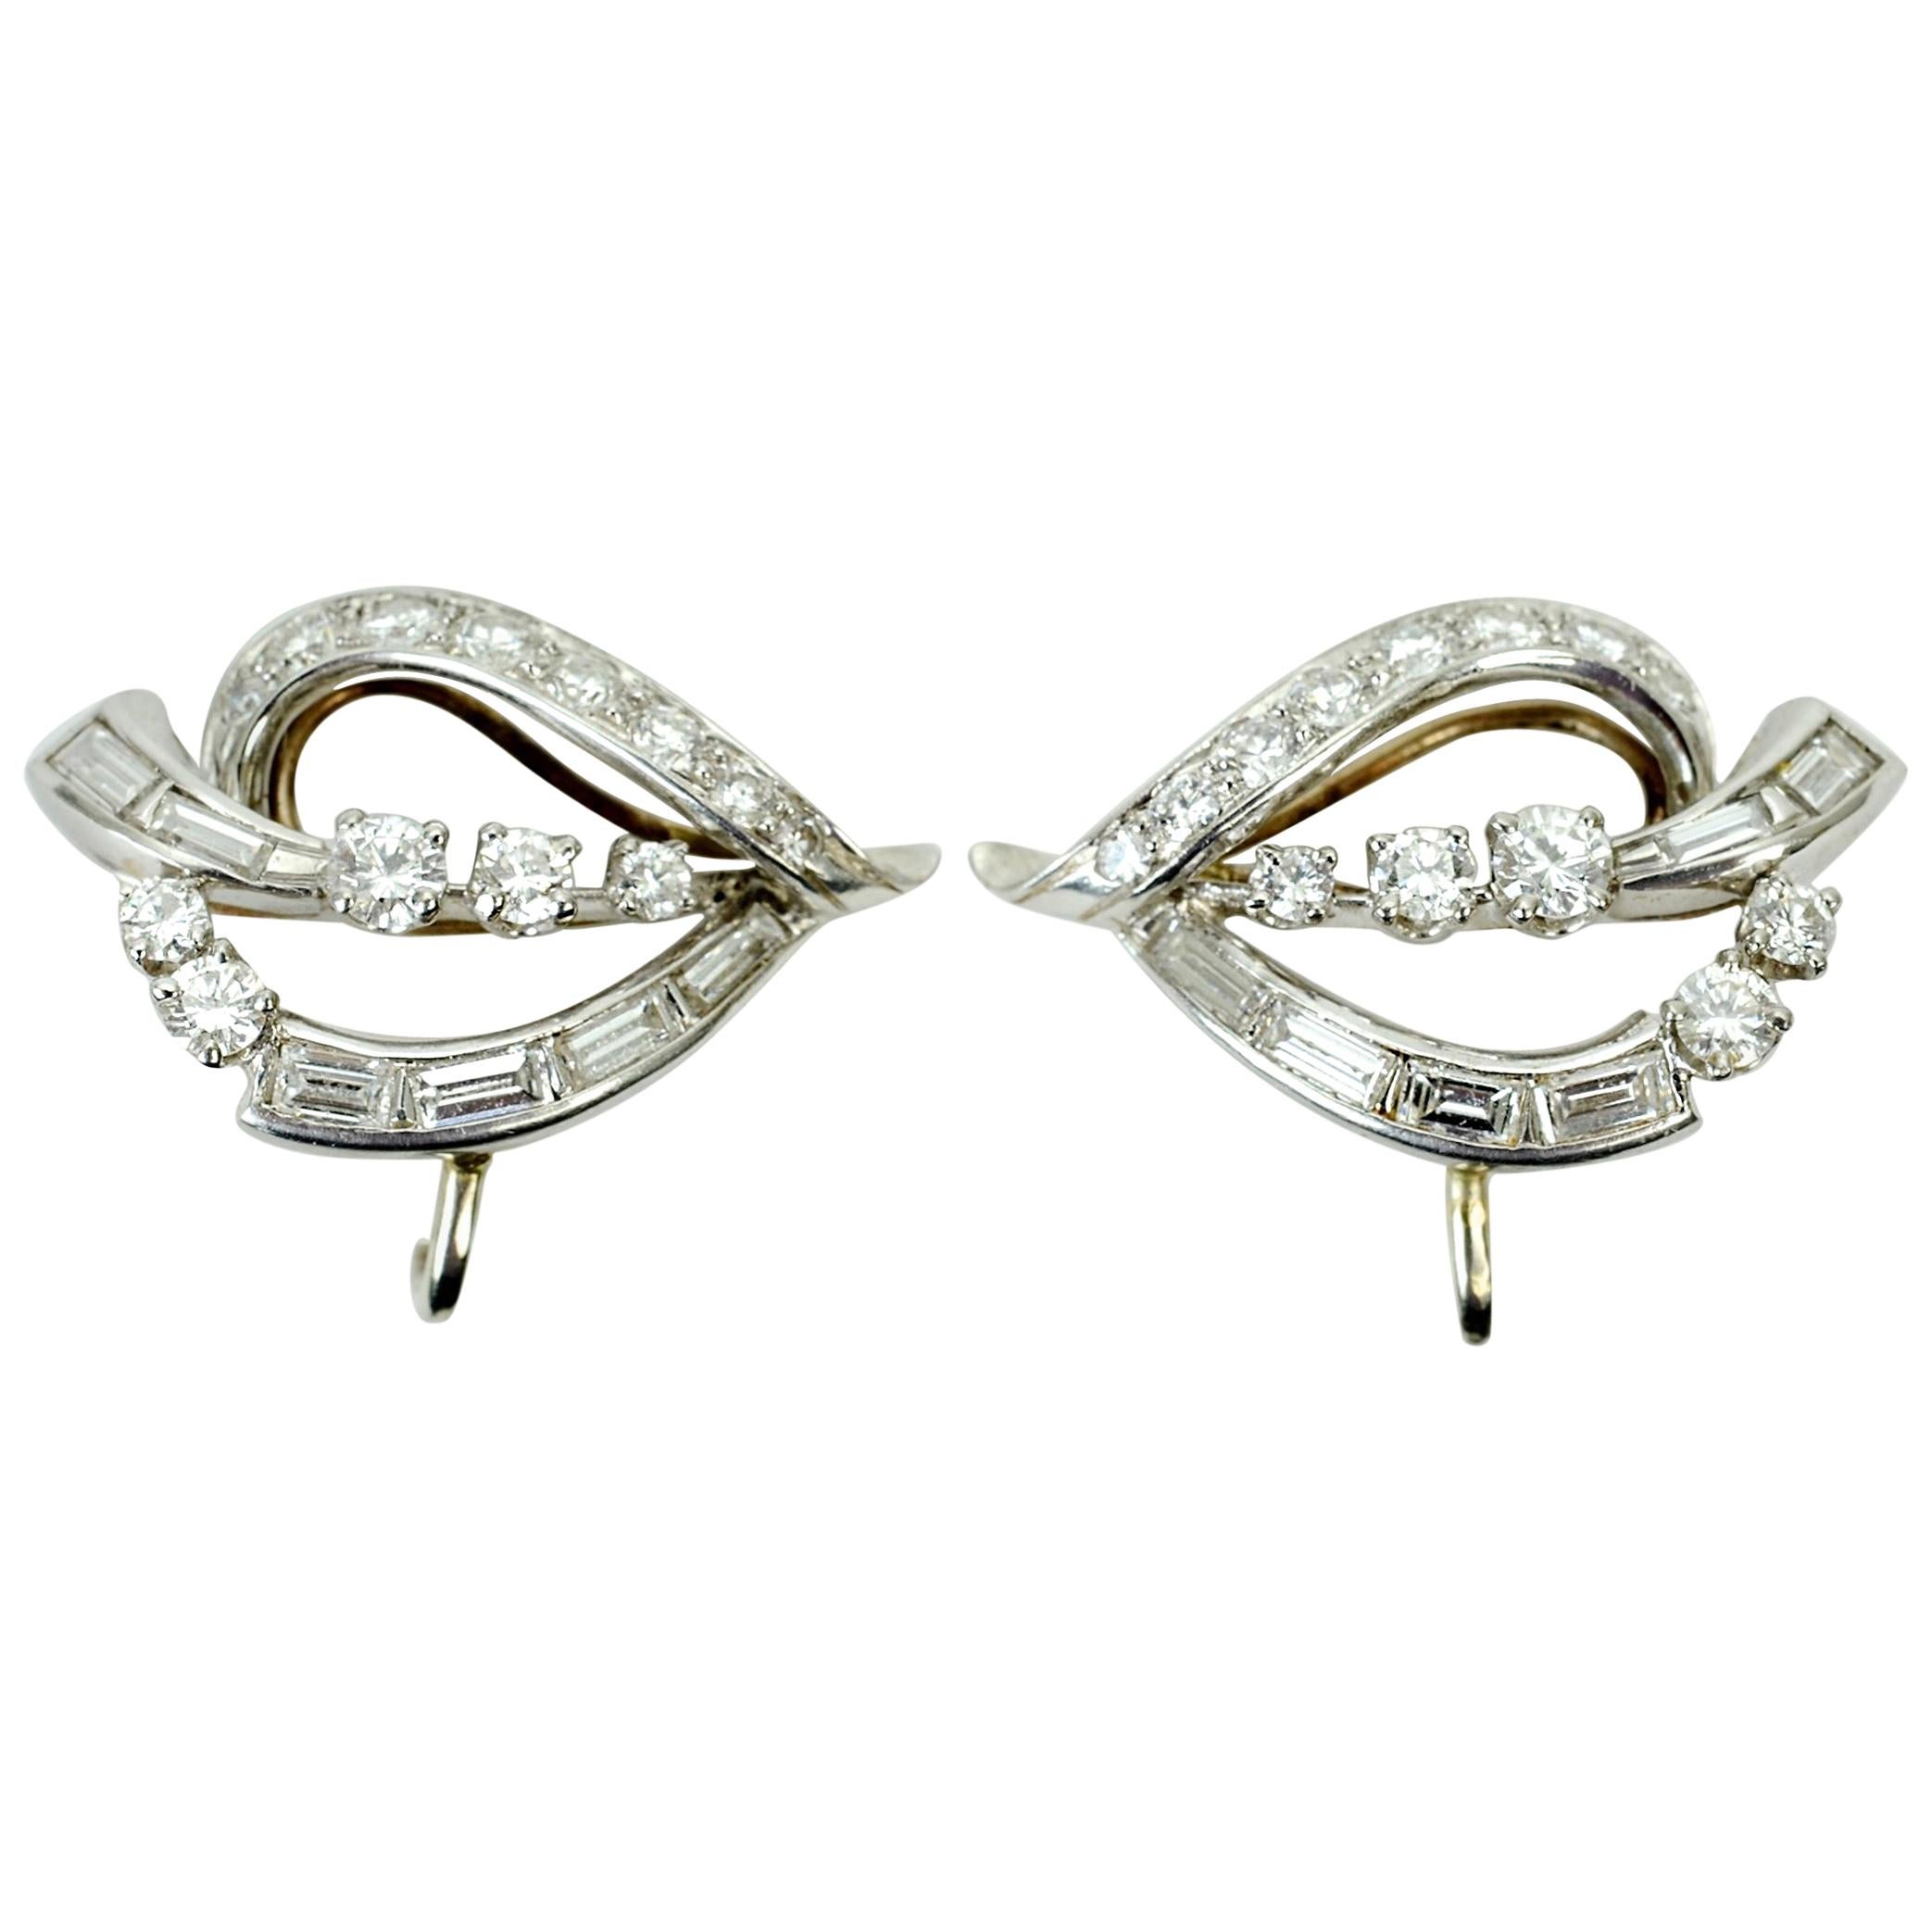 Pr of Retro Leaf Shaped Diamond Ear Clips Mounted in 14 KT and Platinum, c1950 For Sale